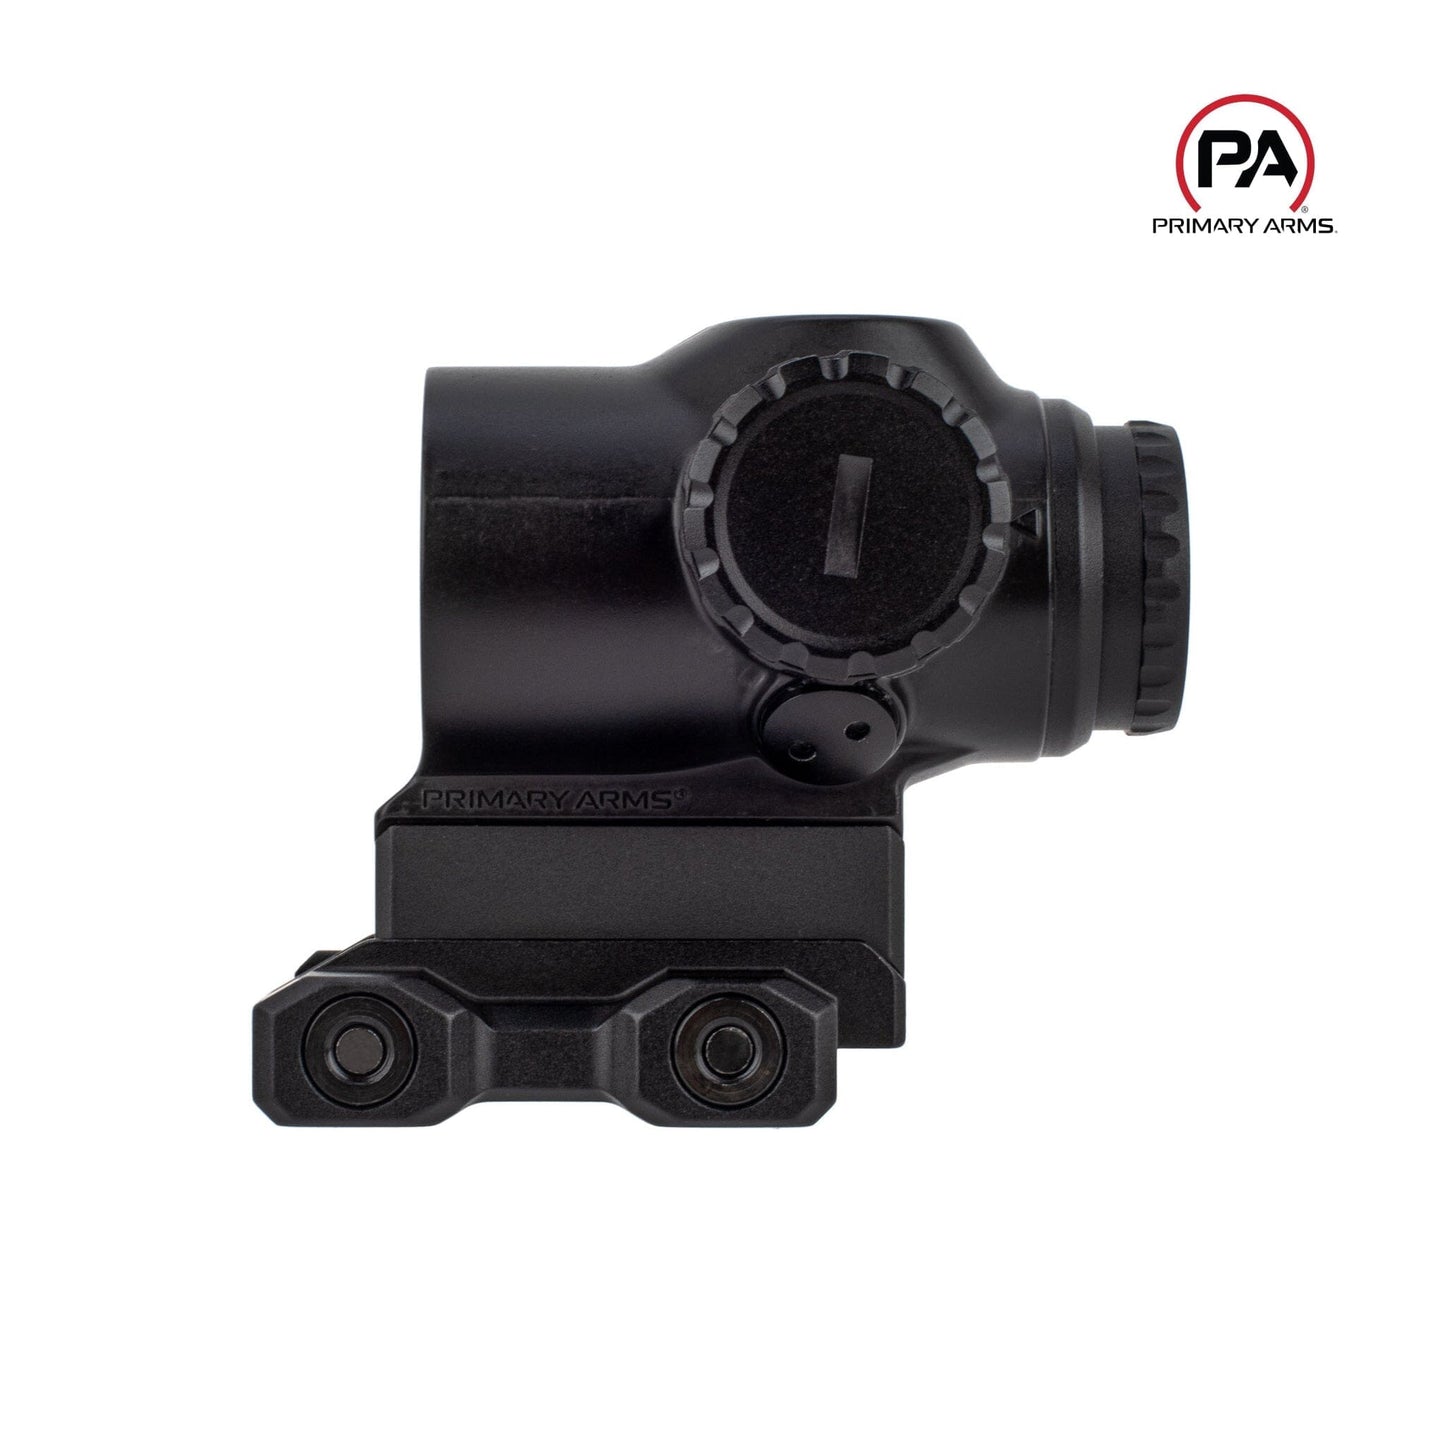 Primary Arms SLx 1X MicroPrism Scope - Green ACSS Gemini 9mm Reticle Prism Rifle Scope Primary Arms 